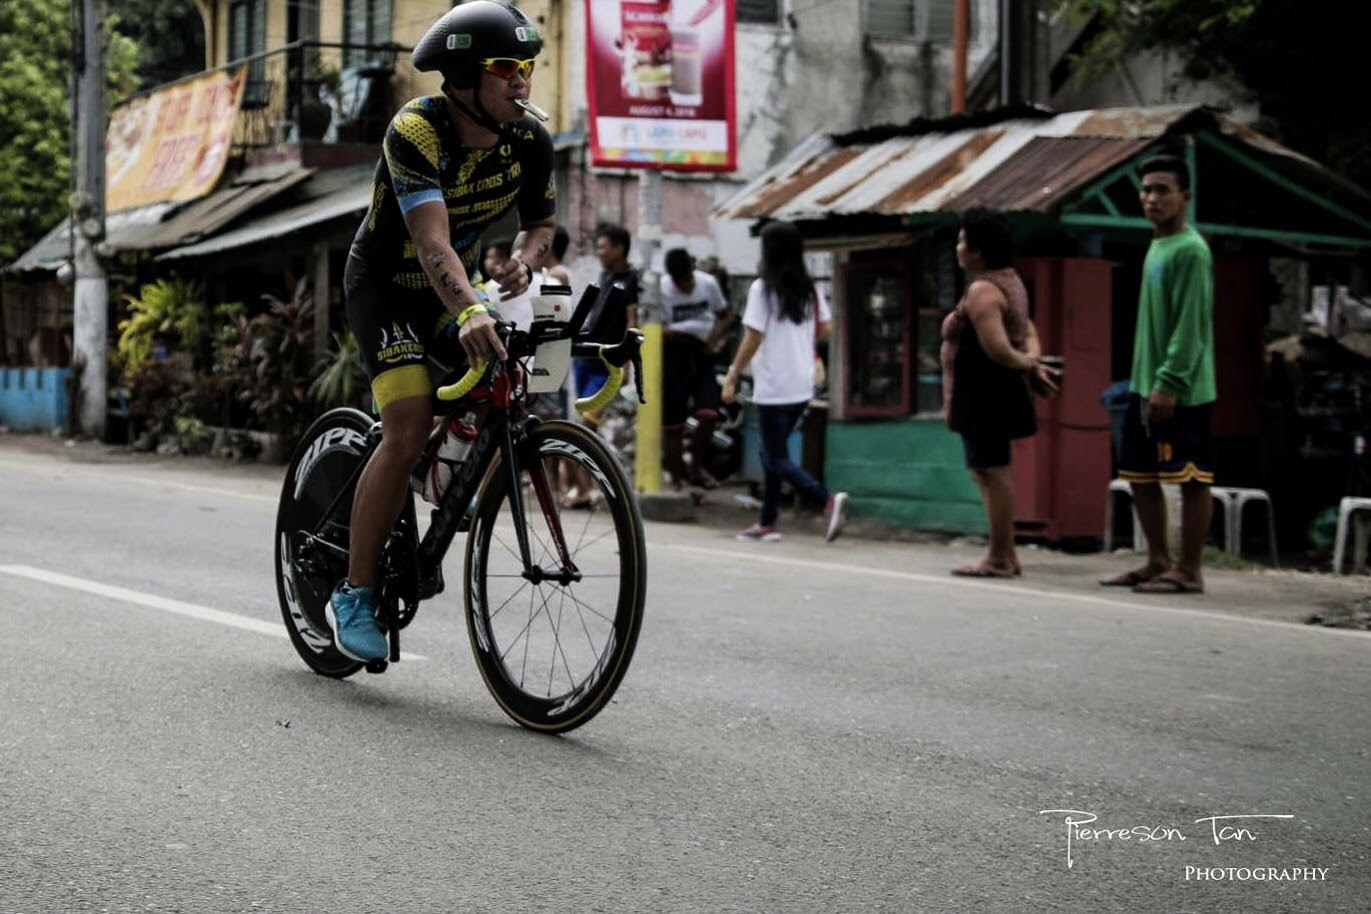 Ang pedaling his way at the 21km bike course of the Regent Aguila Ironman 70.3 race in Cebu